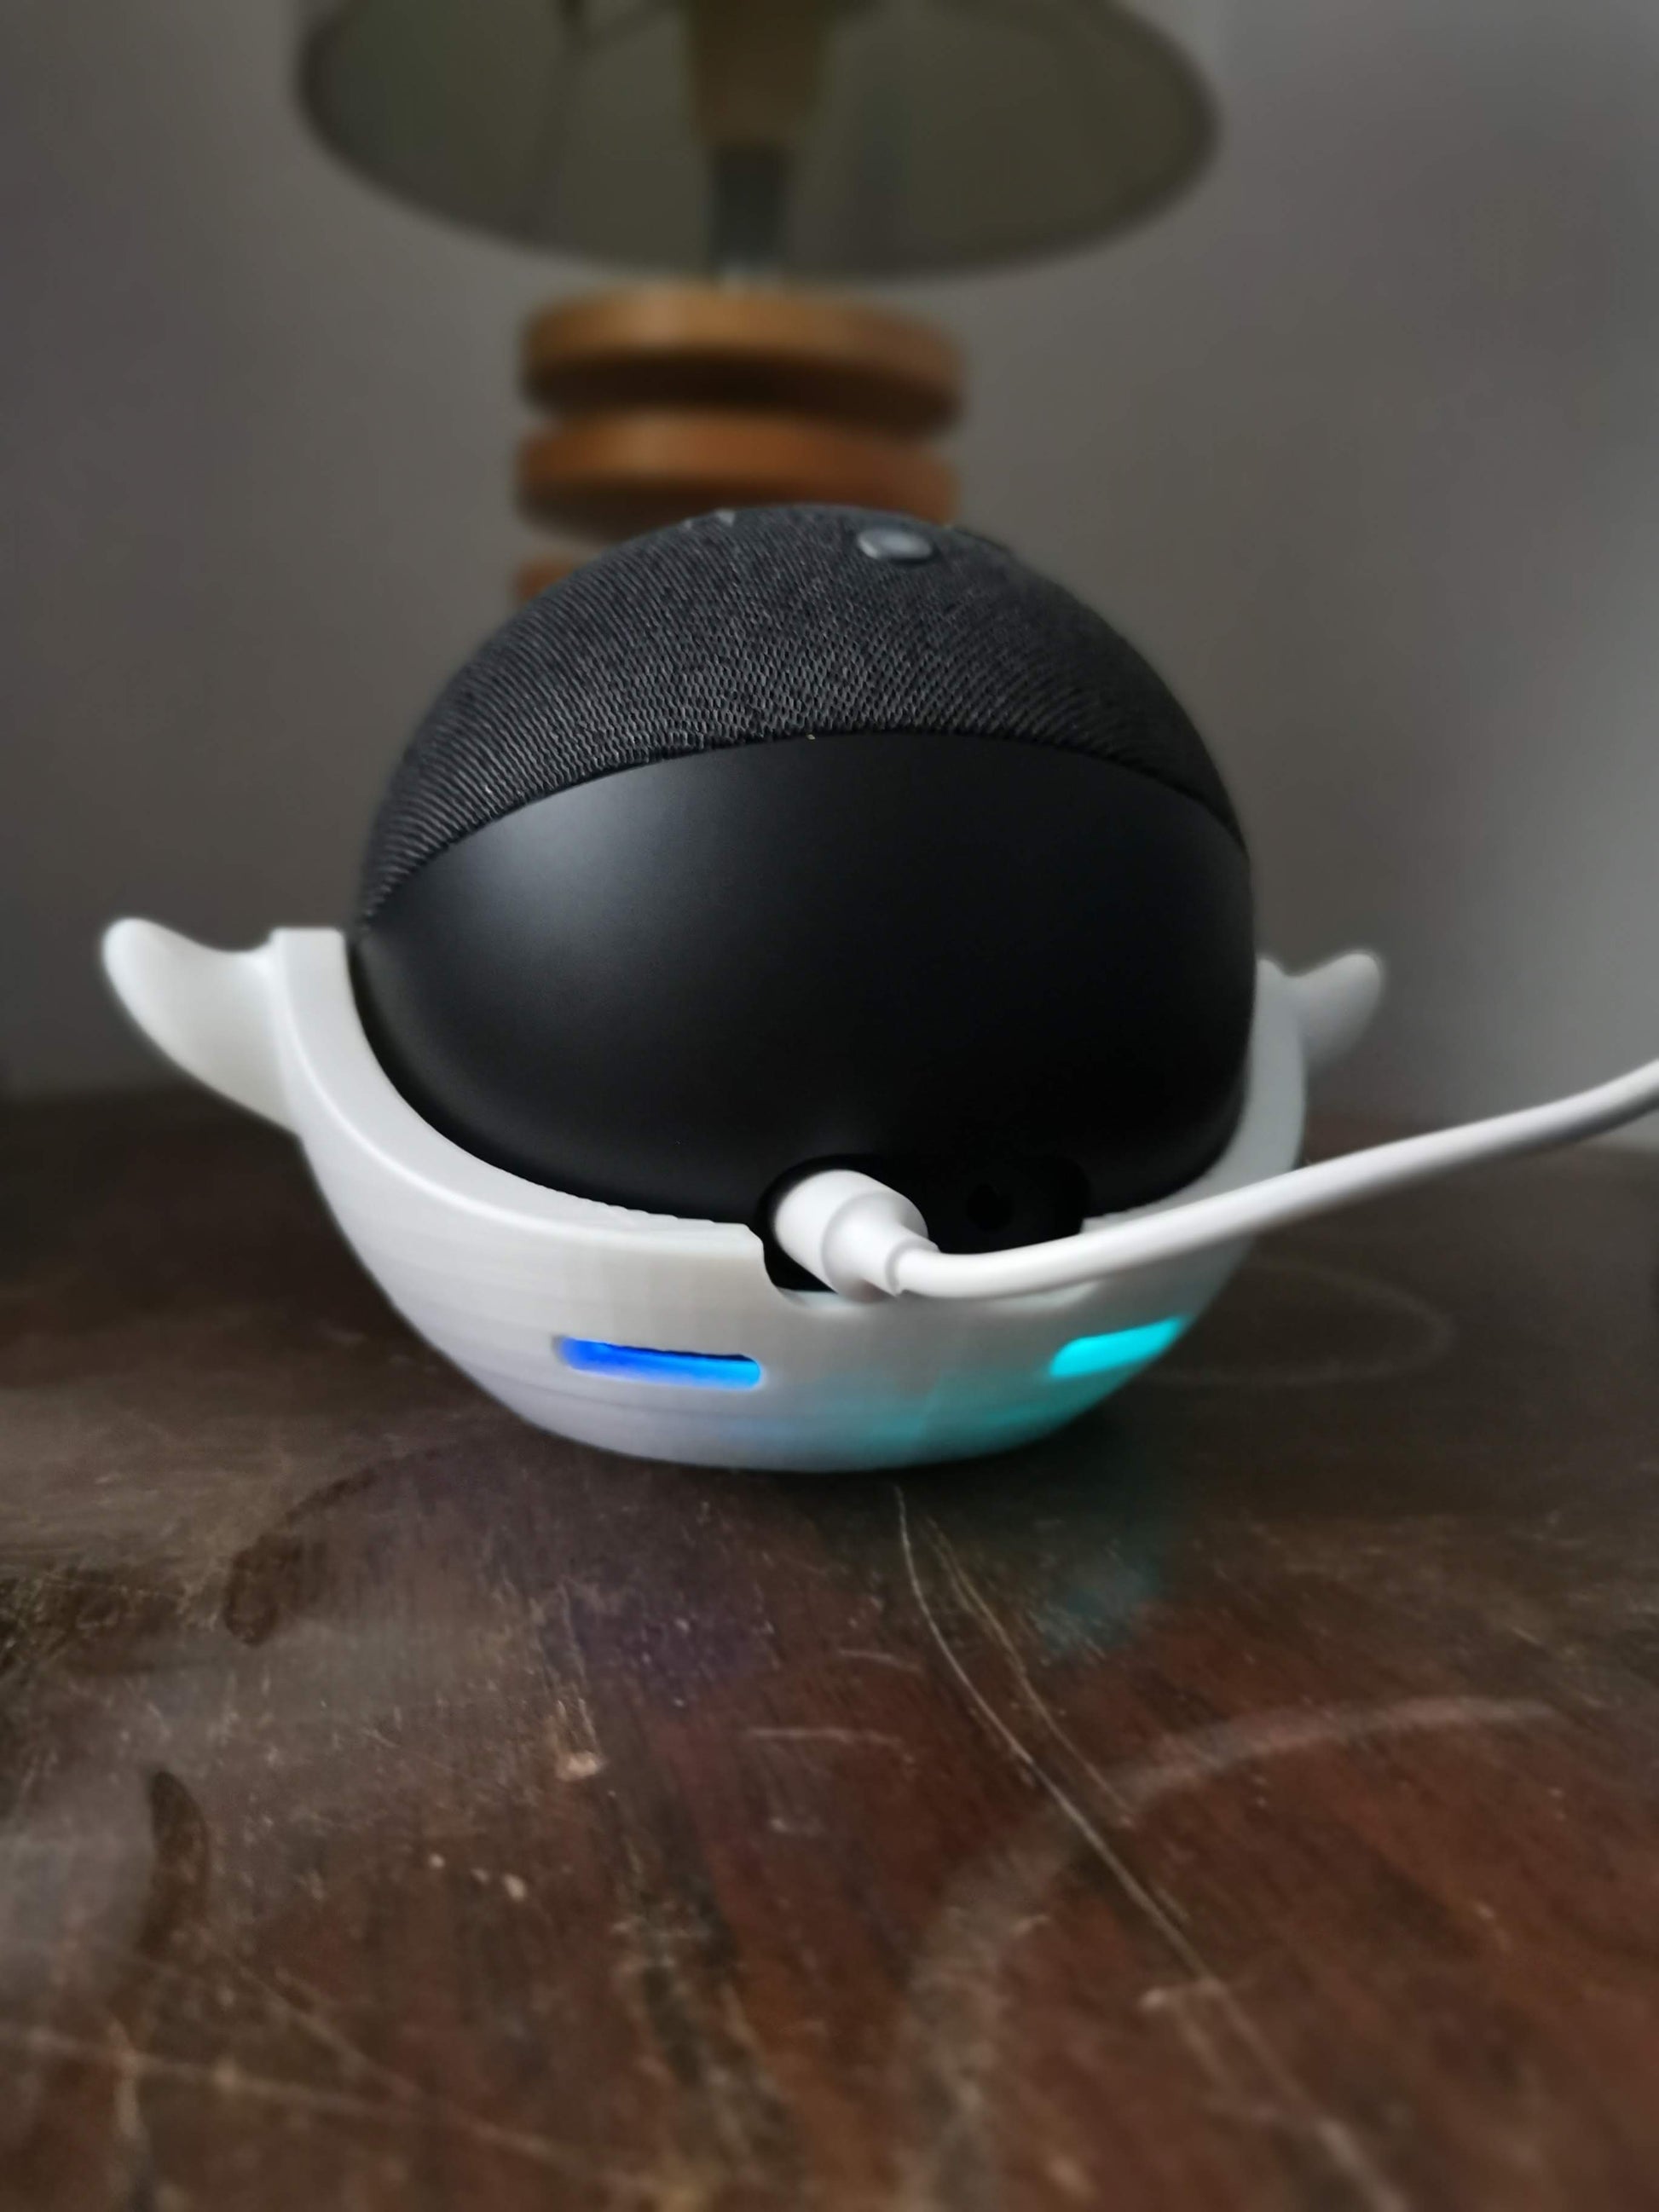 Alexa Echo Boo holder with echo inside from the back